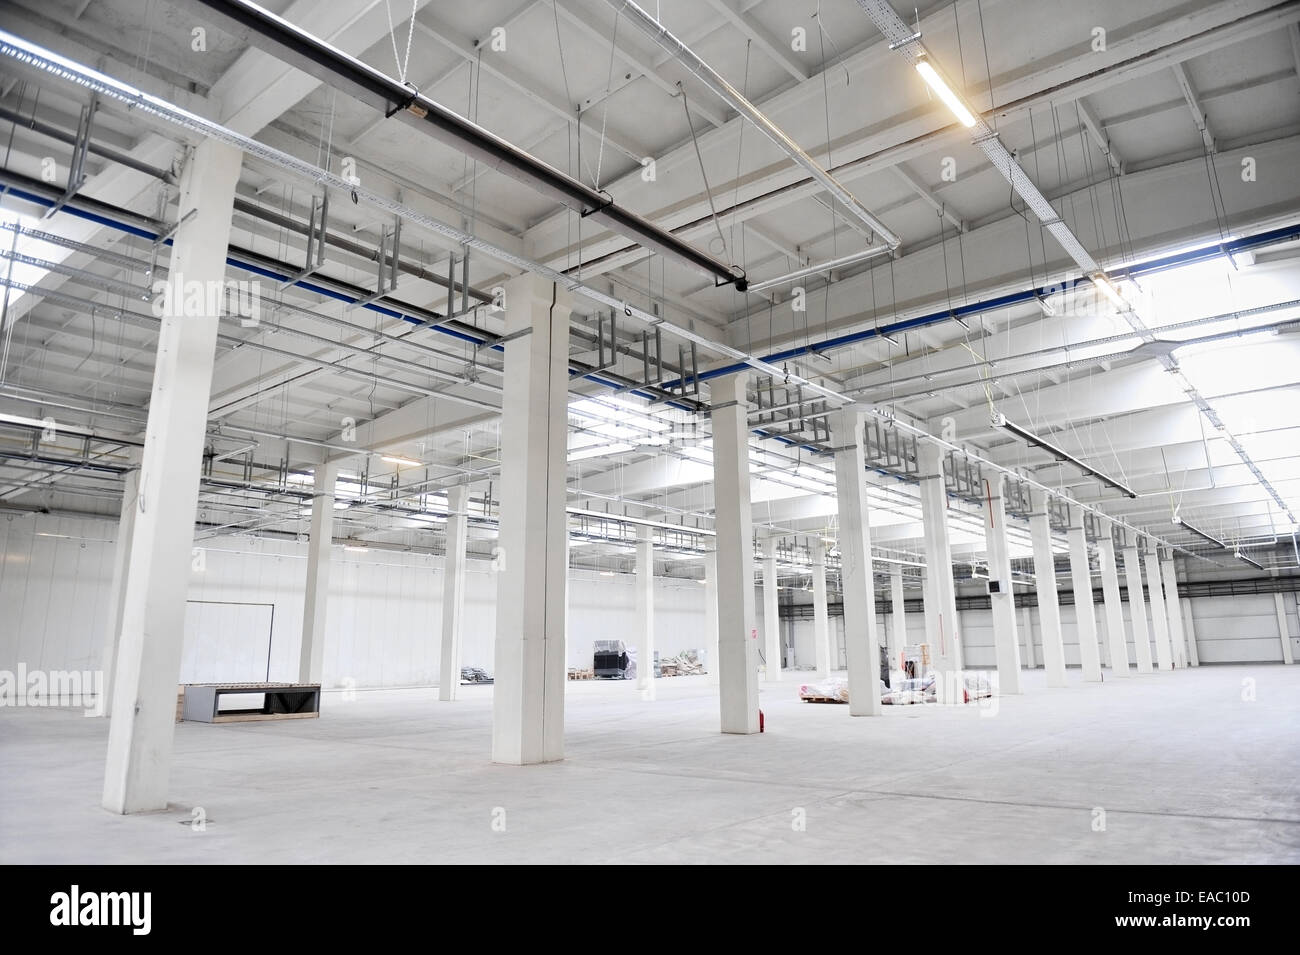 Interior detail with an empty industrial storage depot with ceiling heating system Stock Photo